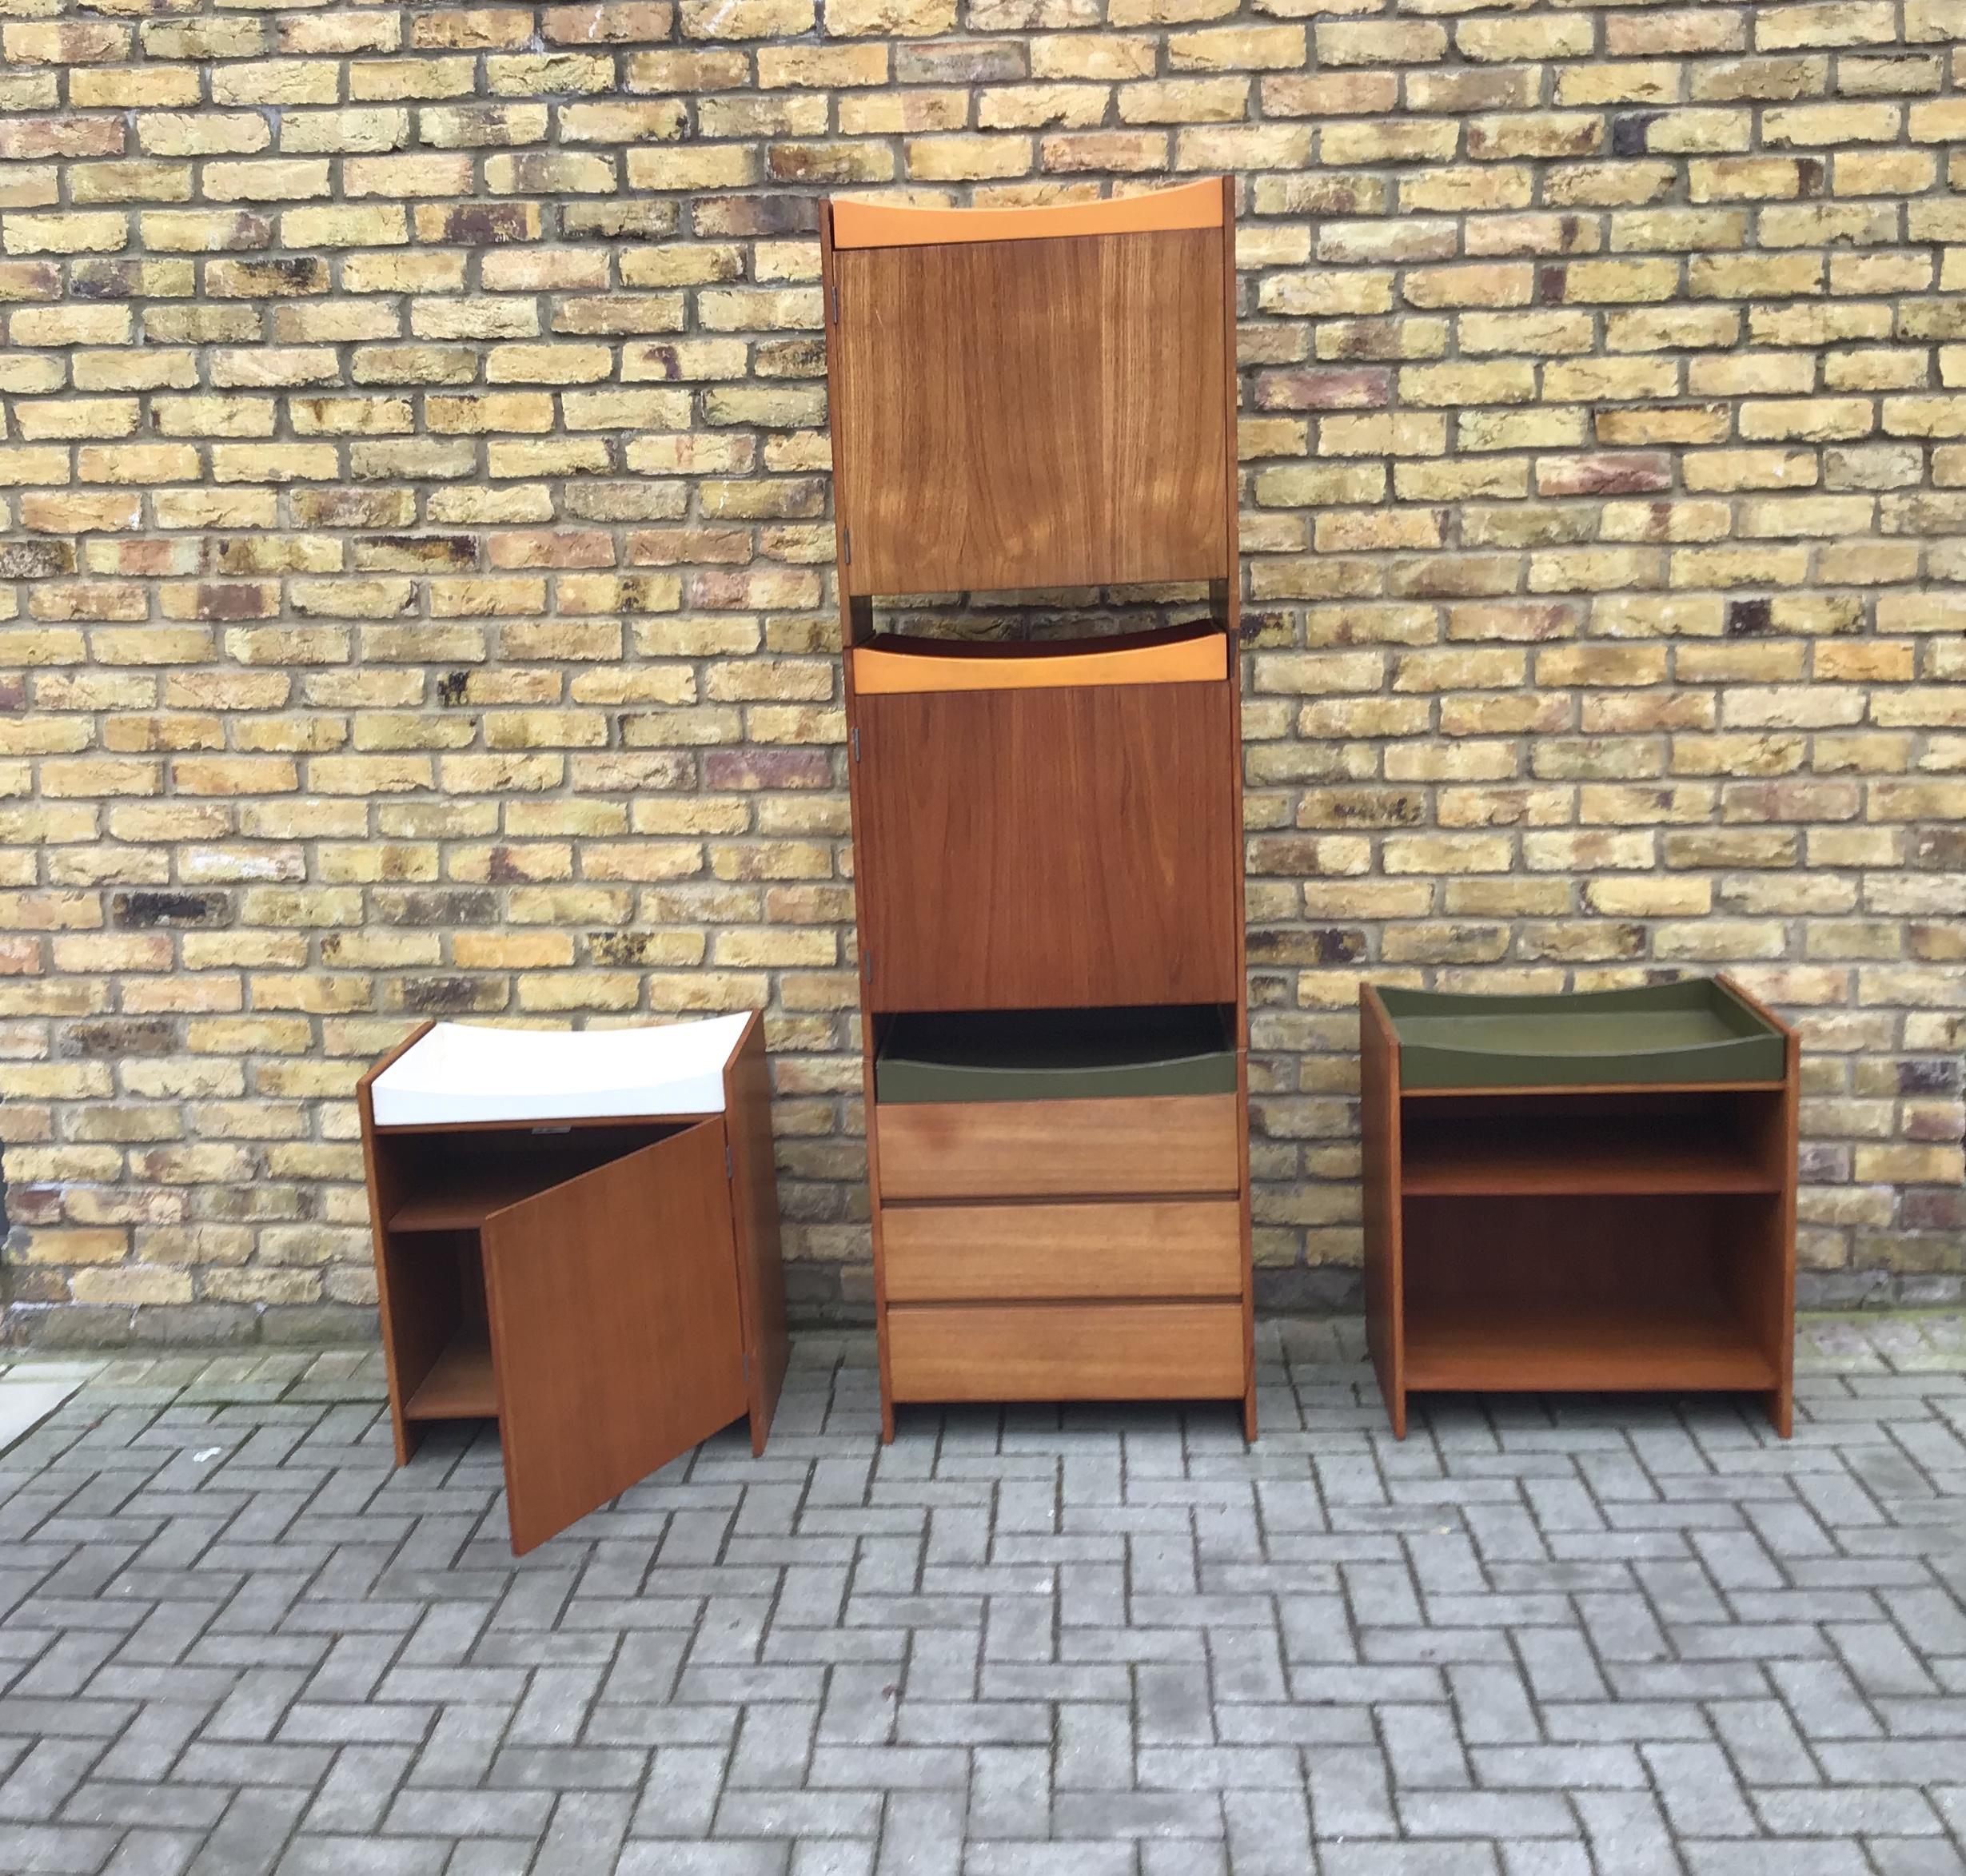 Modular flexible storage units with interchangeable cabinets
Teak units with one chest of draws, circa 1960s.